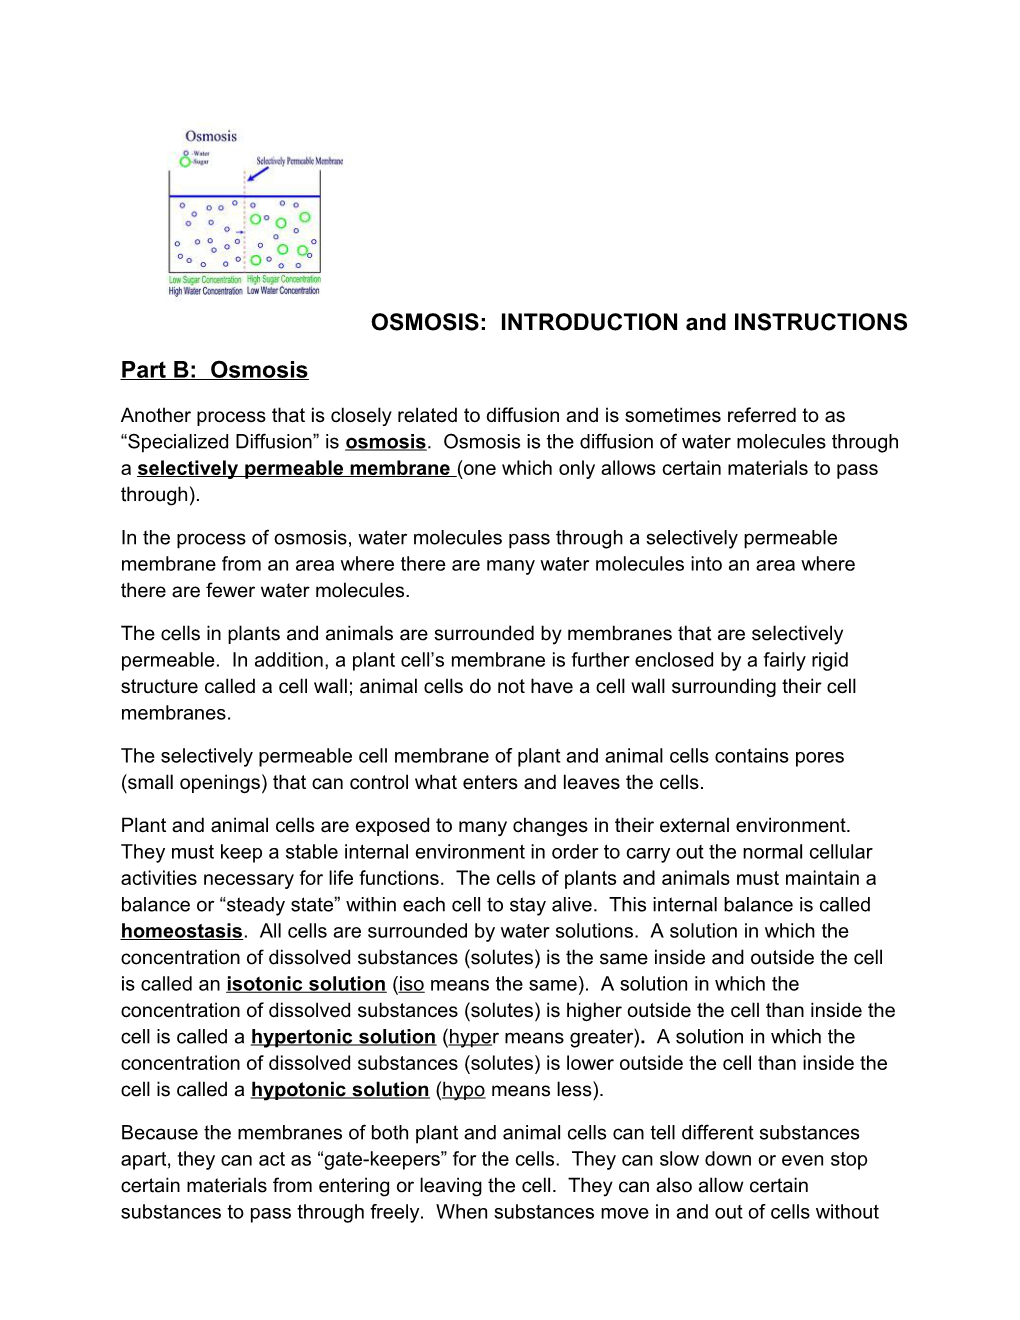 OSMOSIS: INTRODUCTION and INSTRUCTIONS